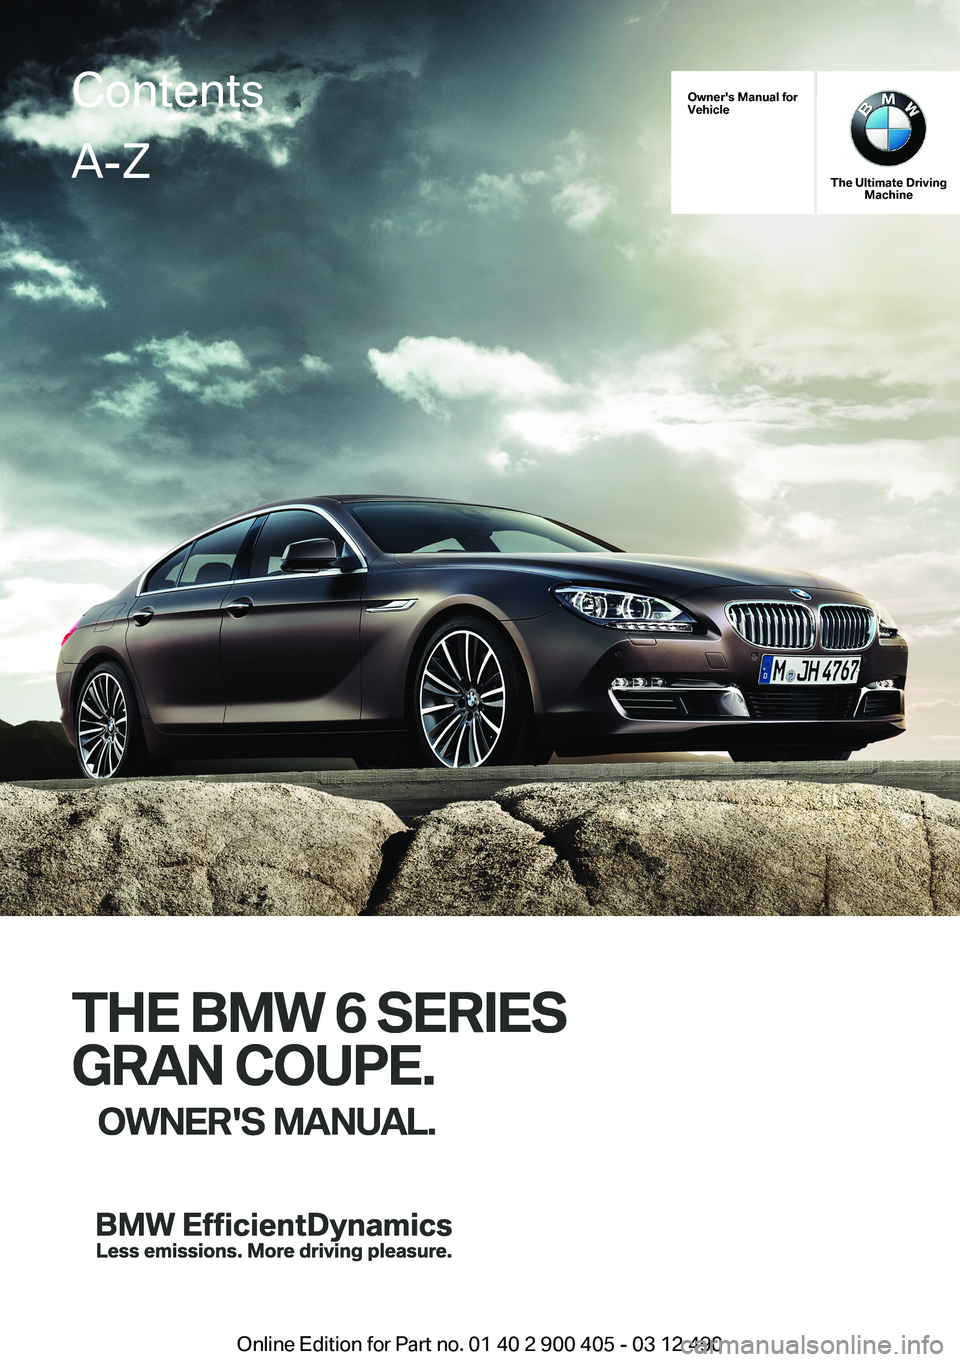 BMW 640I GRAN COUPE 2013  Owners Manual Owner's Manual forVehicle
THE BMW 6 SERIES
GRAN COUPE.
OWNER'S MANUAL.
The Ultimate DrivingMachine
THE BMW 6 SERIES
GRAN COUPE.
OWNER'S MANUAL.
ContentsA-Z
Online Edition for Part no. 01 4